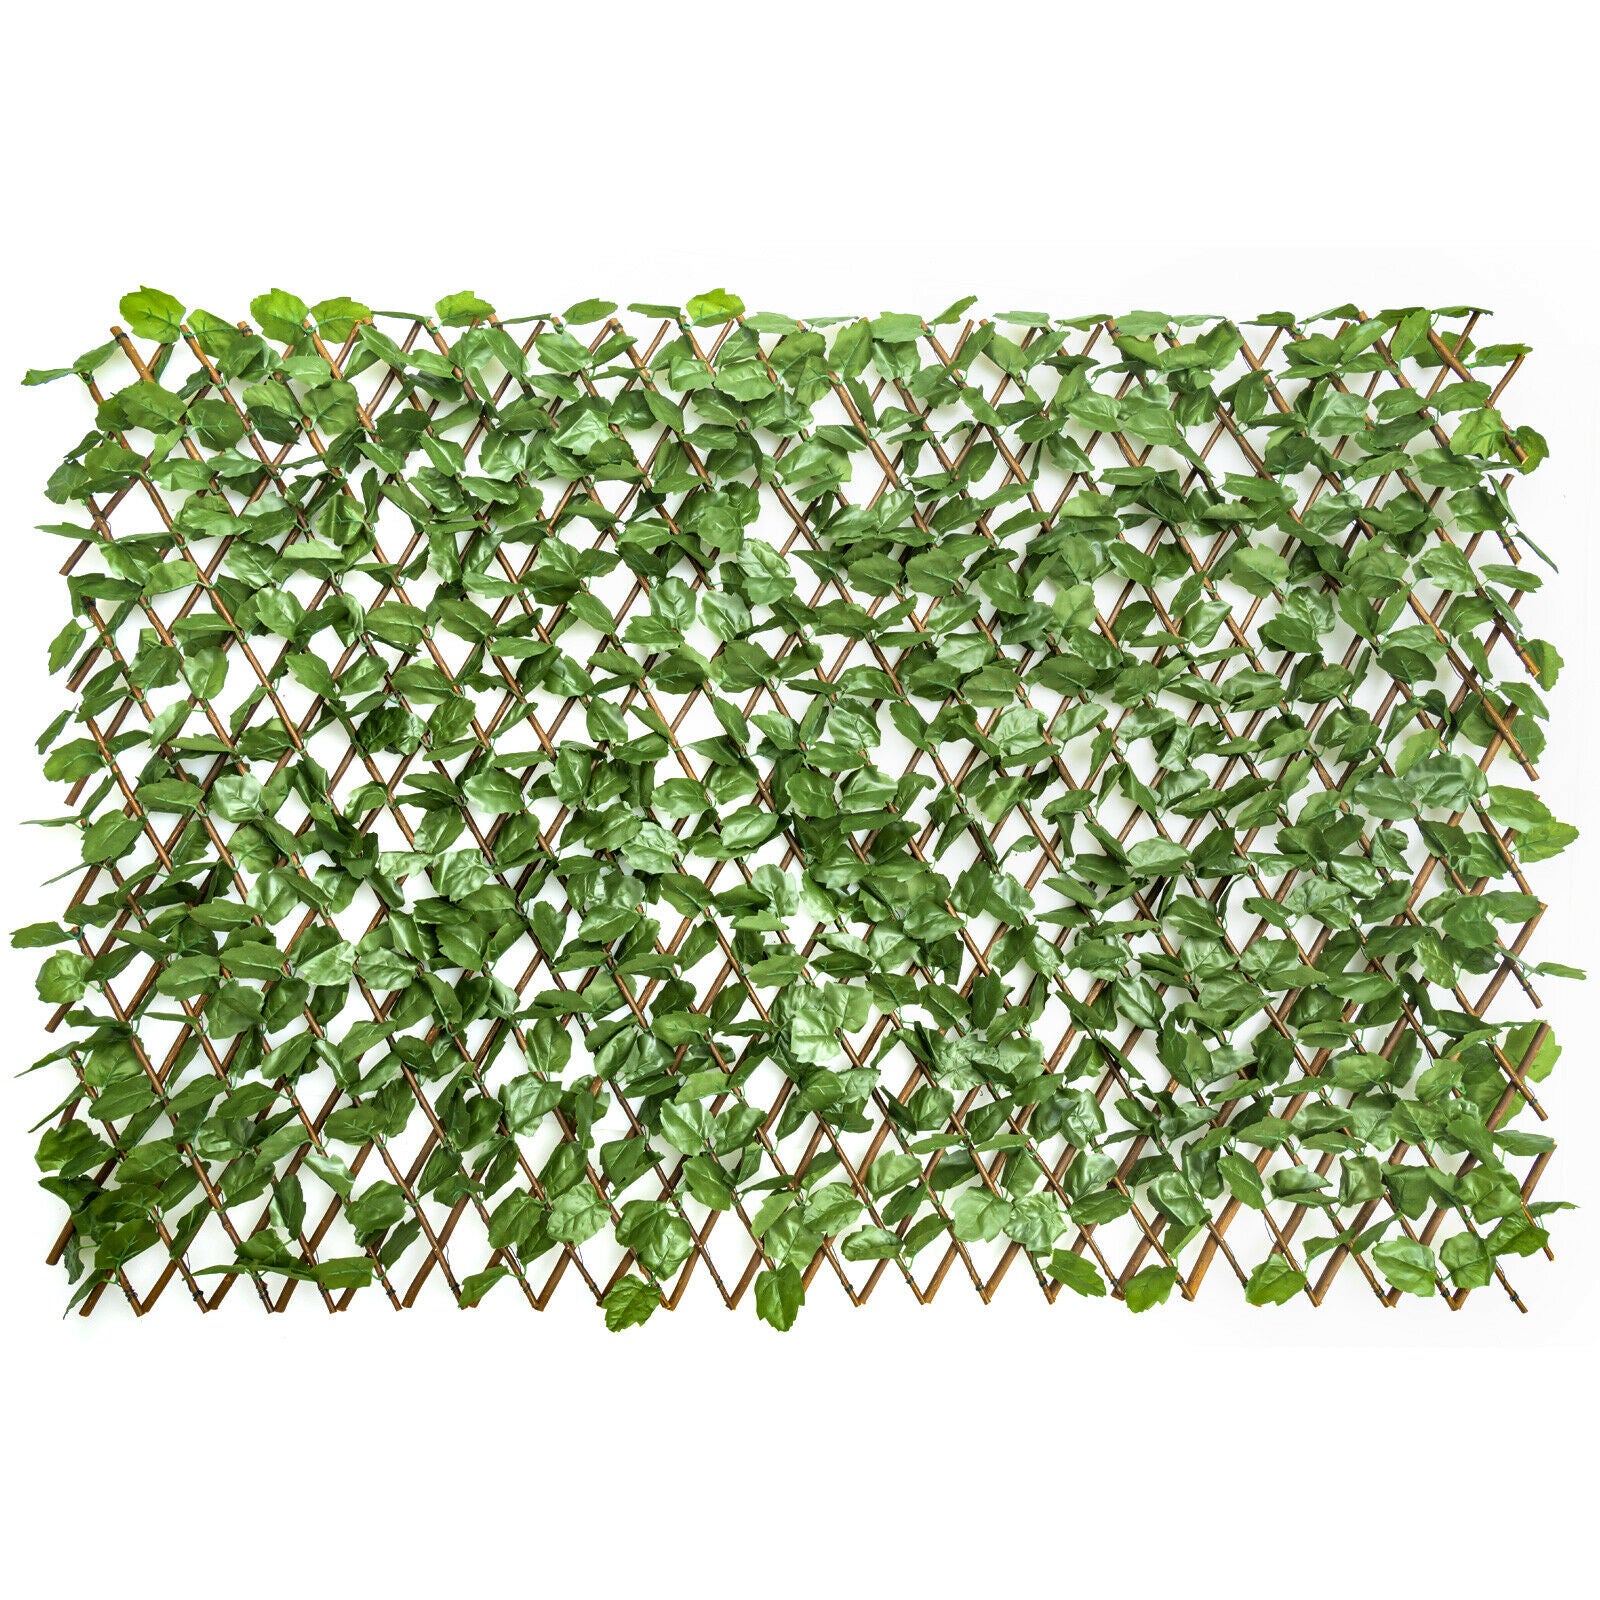 Artificial Expanding Ivy Covered Trellis x3